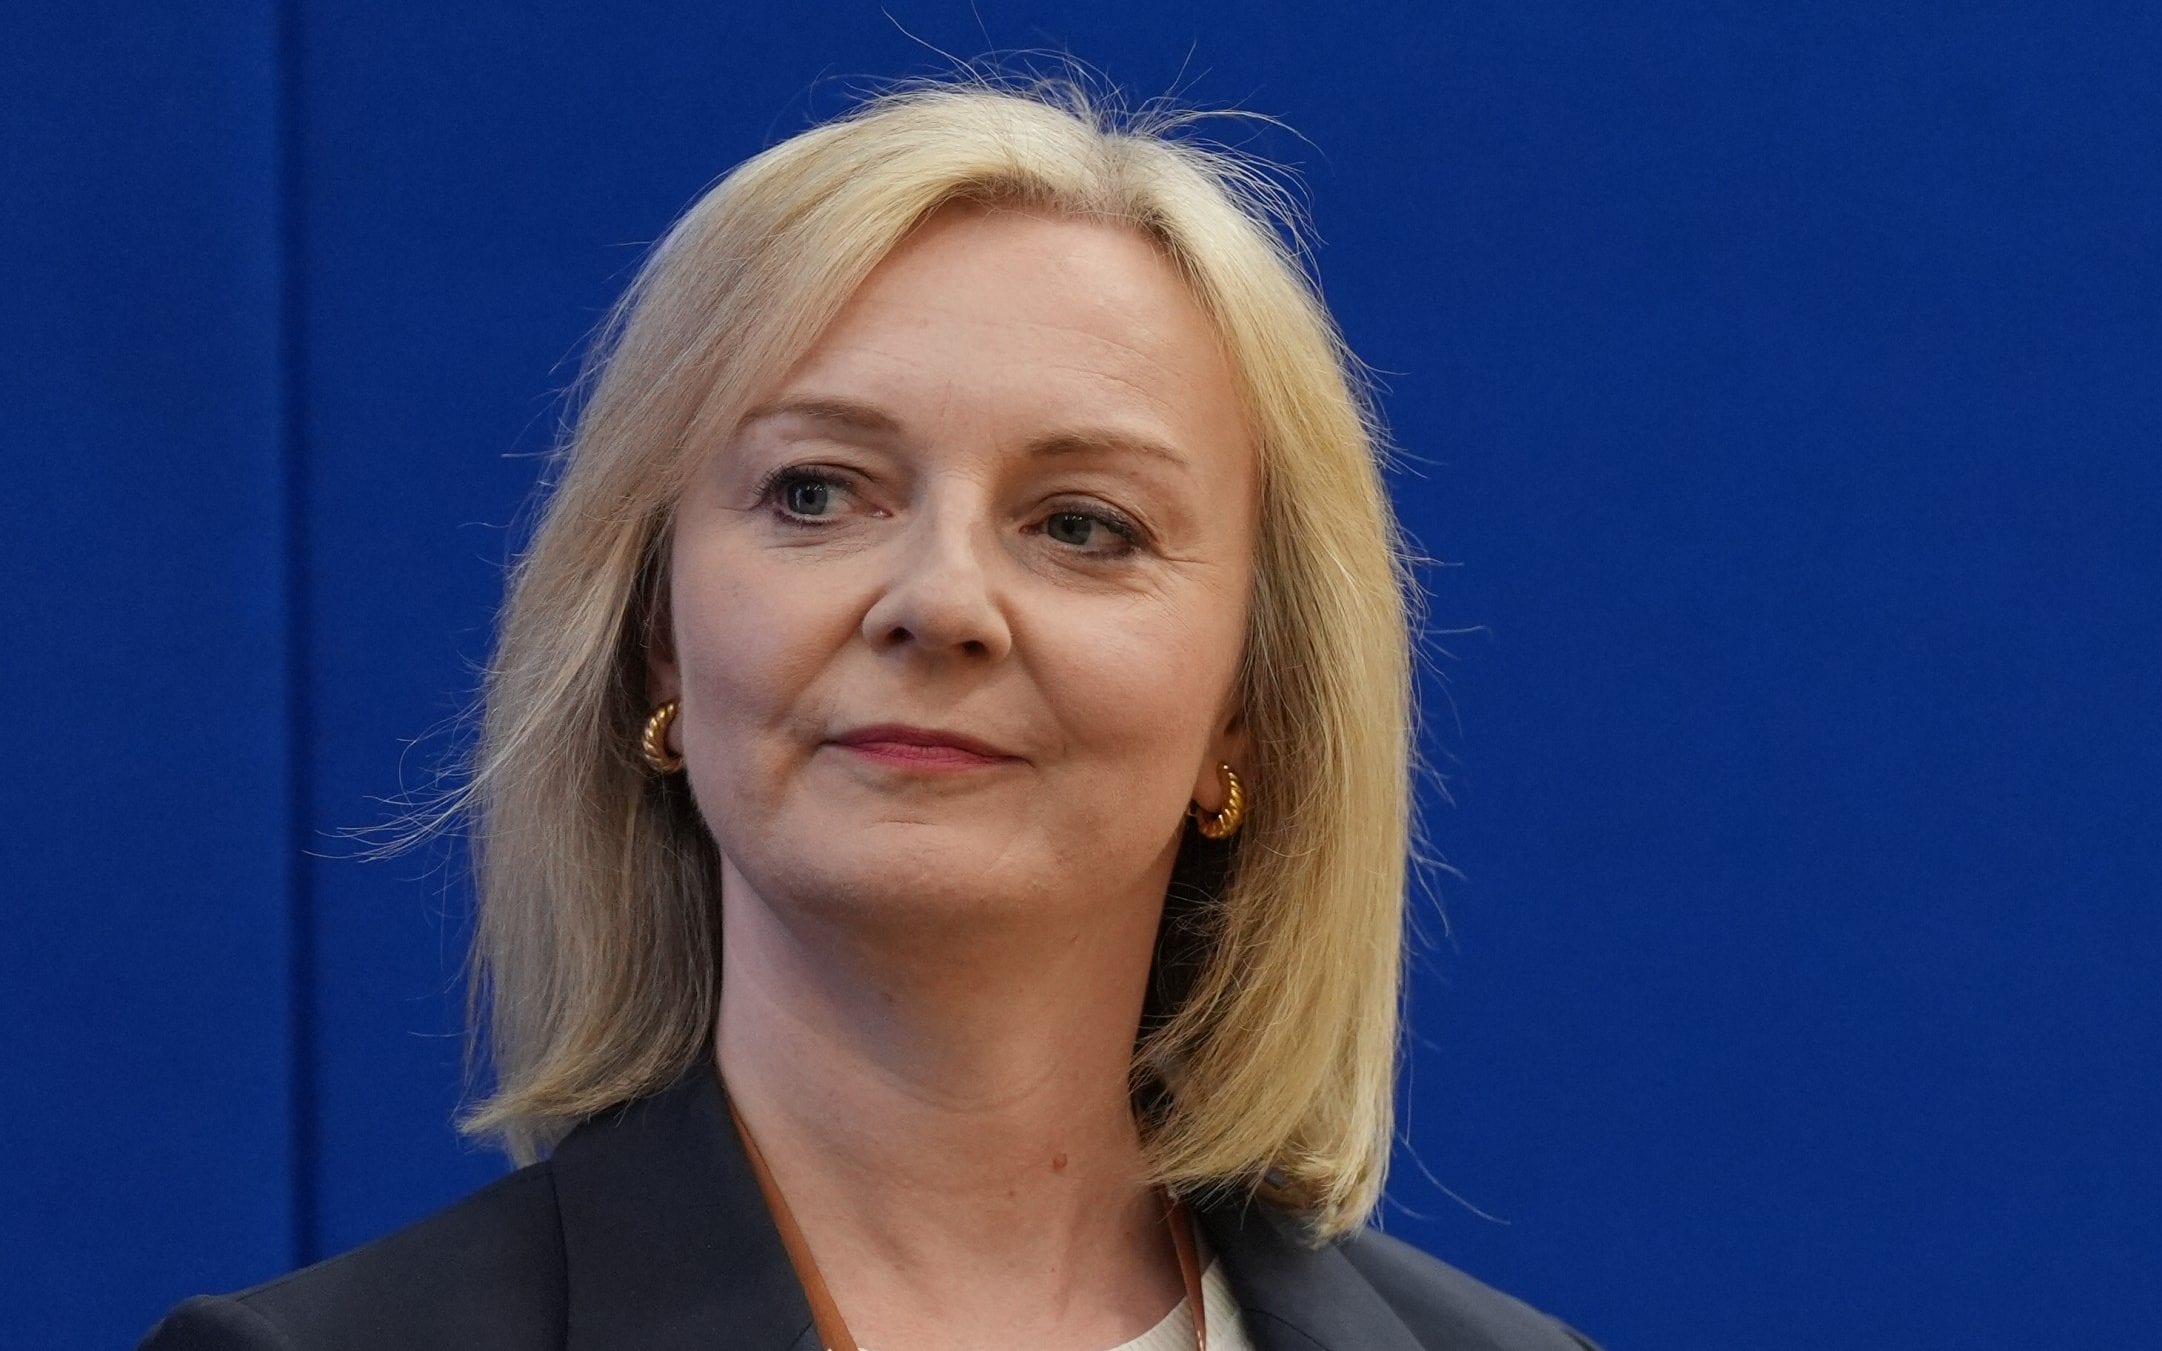 The spectre of Liz Truss will hang over this Parliament